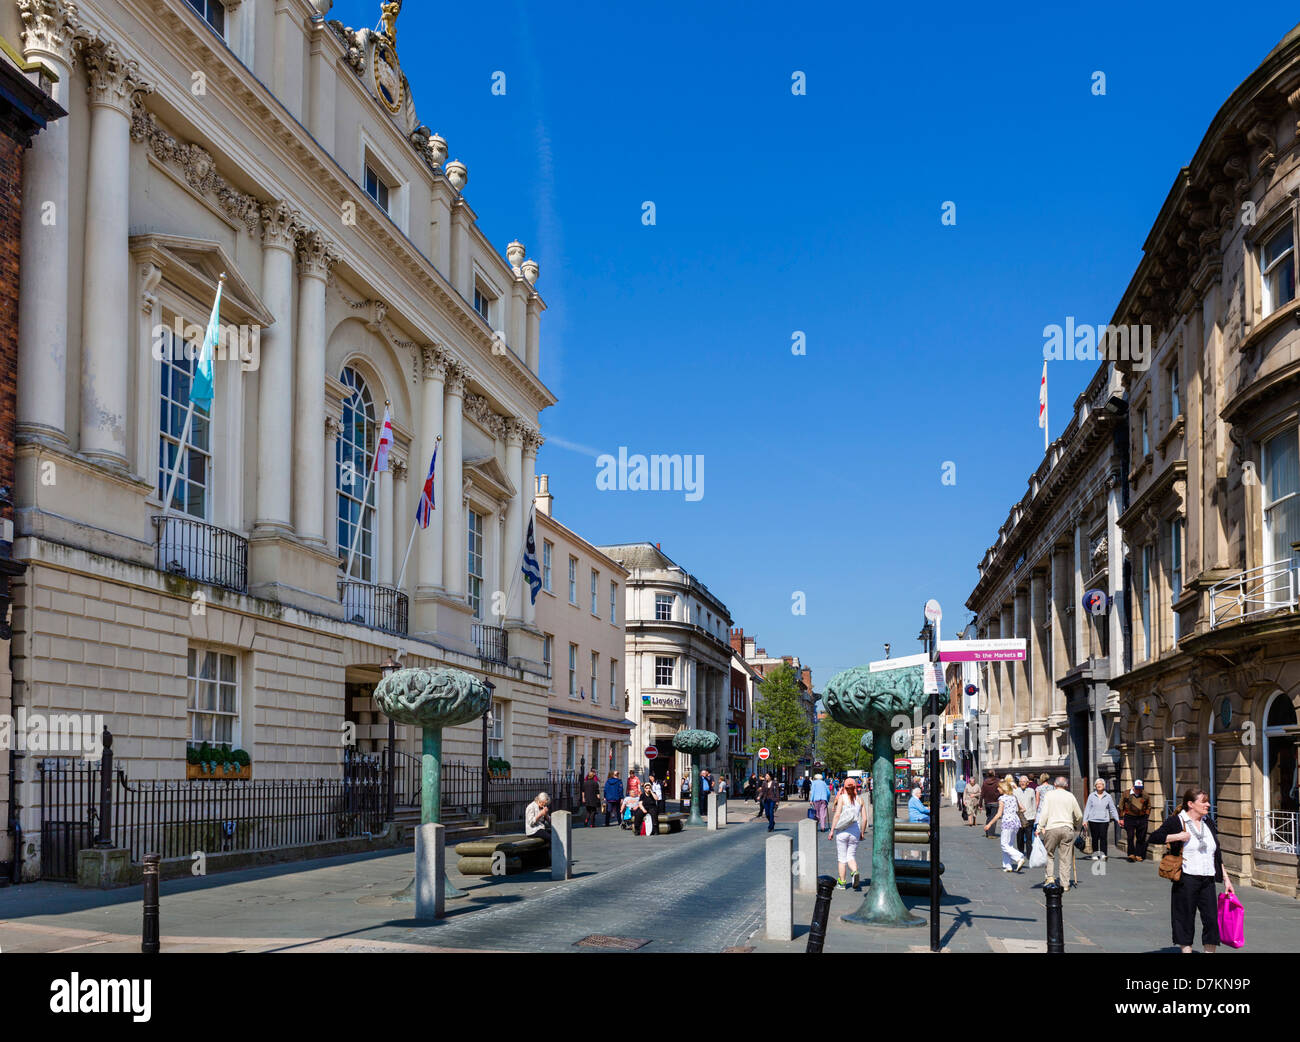 High Street, con la storica Mansion House a sinistra, Doncaster, South Yorkshire, Inghilterra, Regno Unito Foto Stock